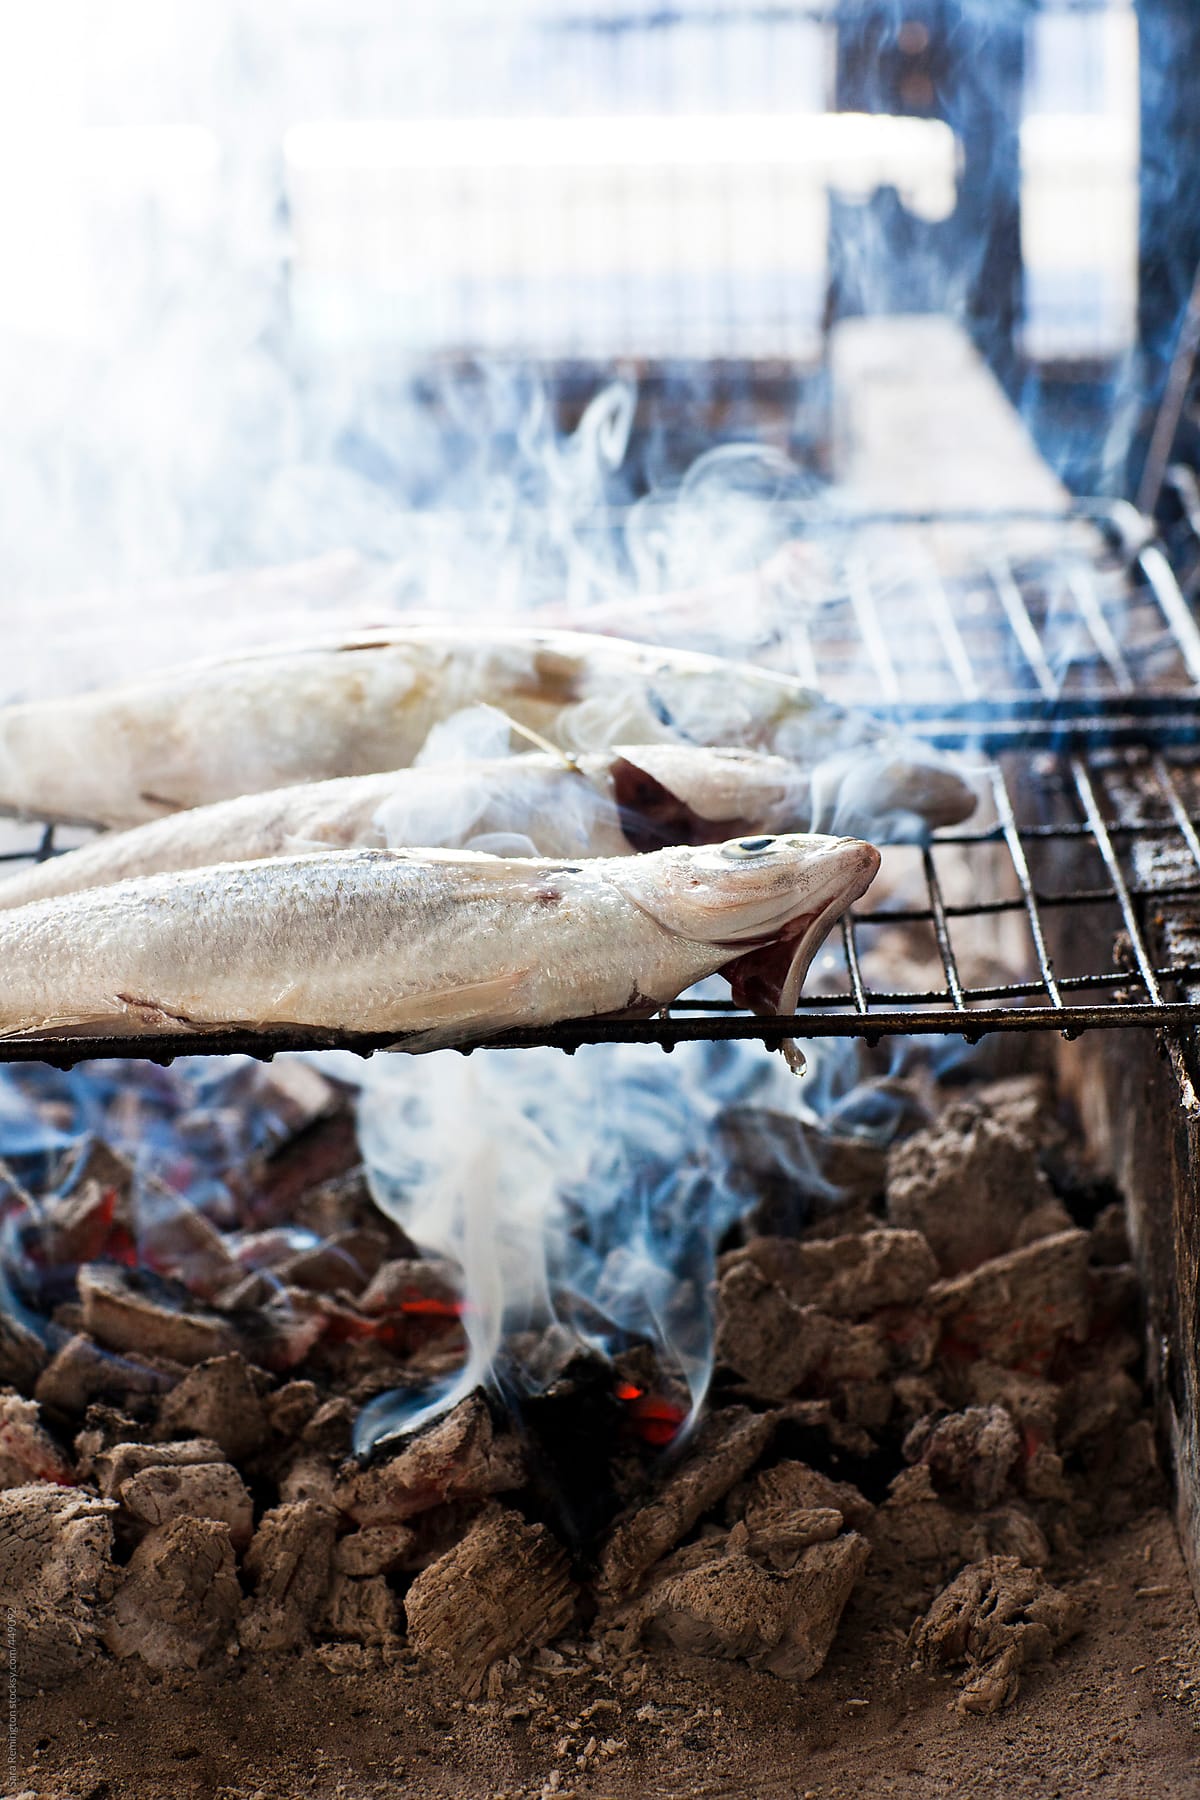 Grilled Fish In Greece